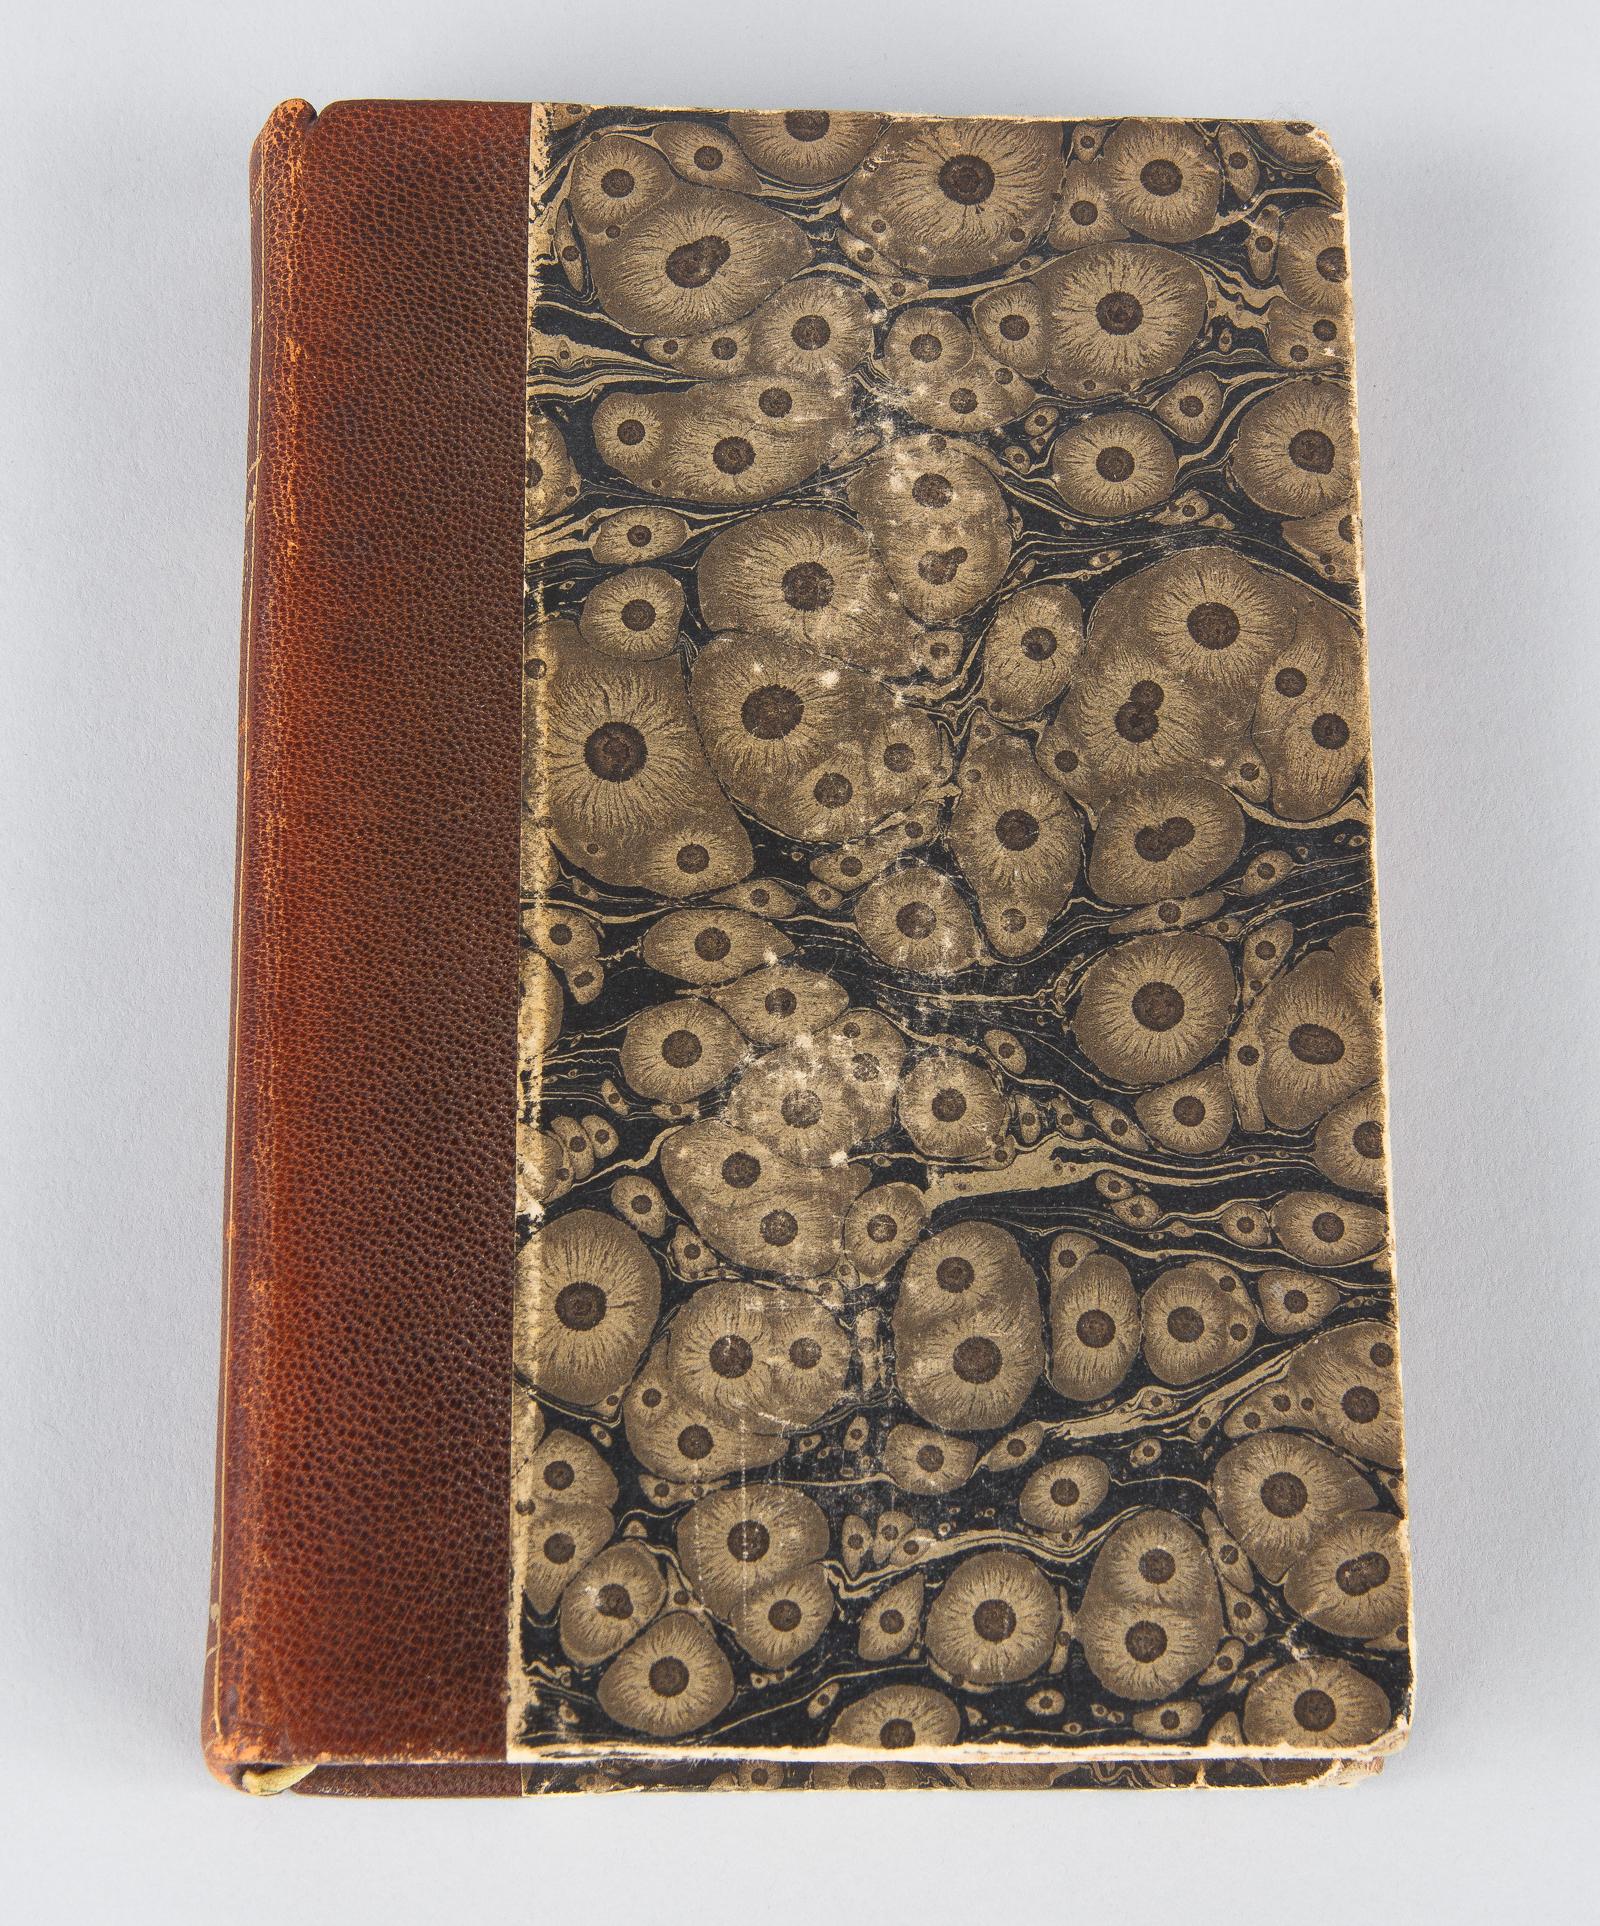 20th Century French Book, L' Appel du Sol by Adrien Bertrand, 1916